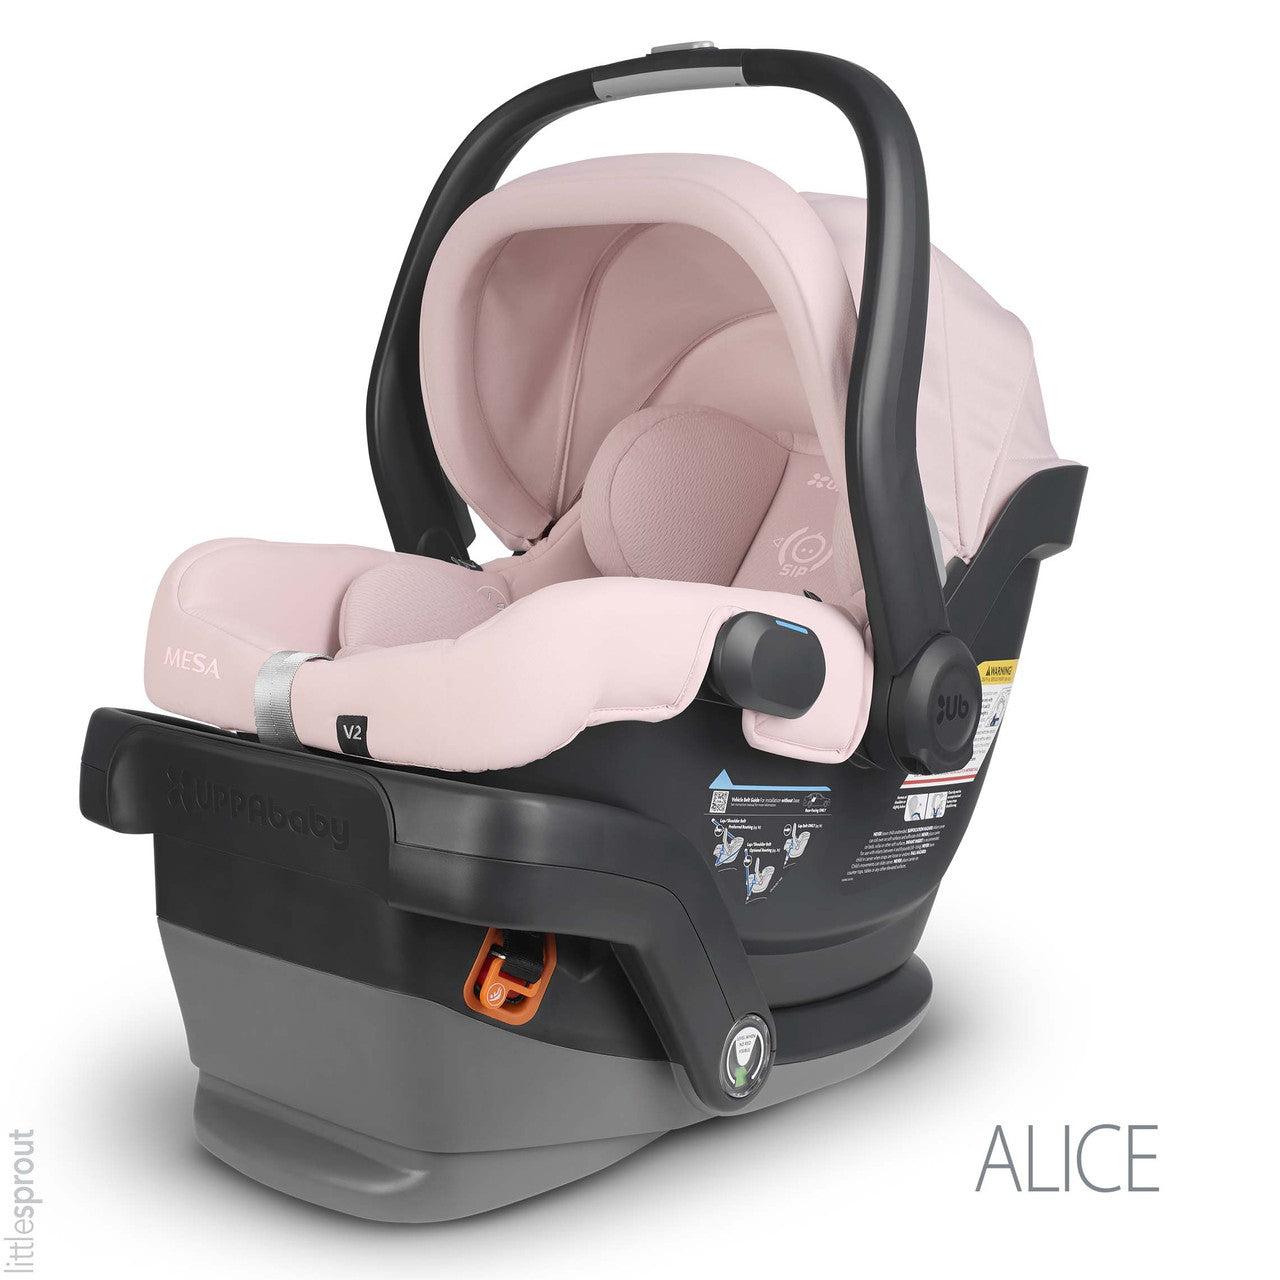 (Open Box - NEW) UPPAbaby Mesa V2 Infant Car Seat & Base - Alice (Dusty Pink)